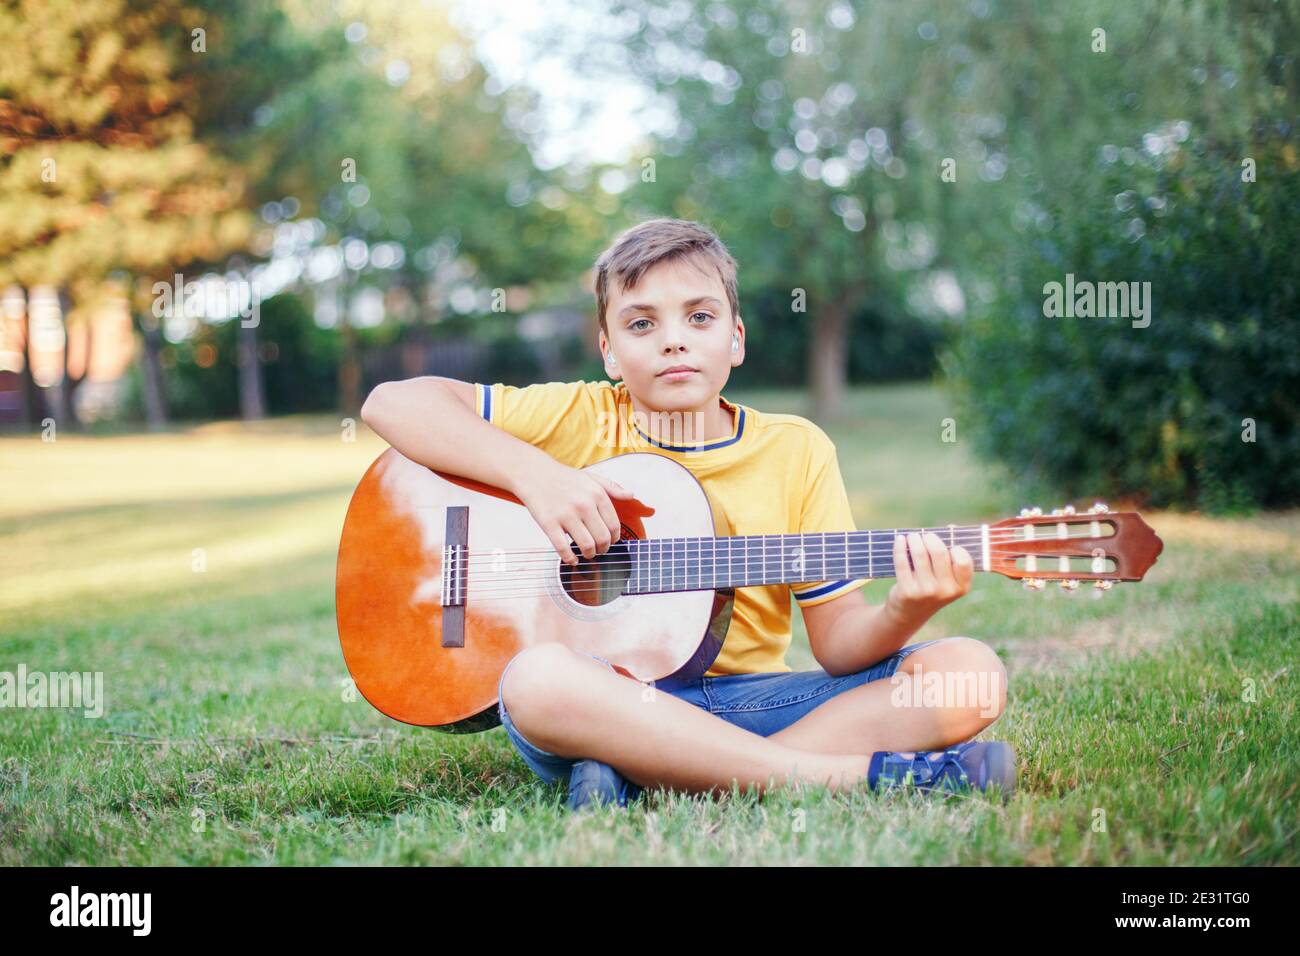 Hard of hearing preteen boy playing guitar outdoor. Child with hearing aids in ears playing music and singing song in park. Hobby art activity Stock Photo